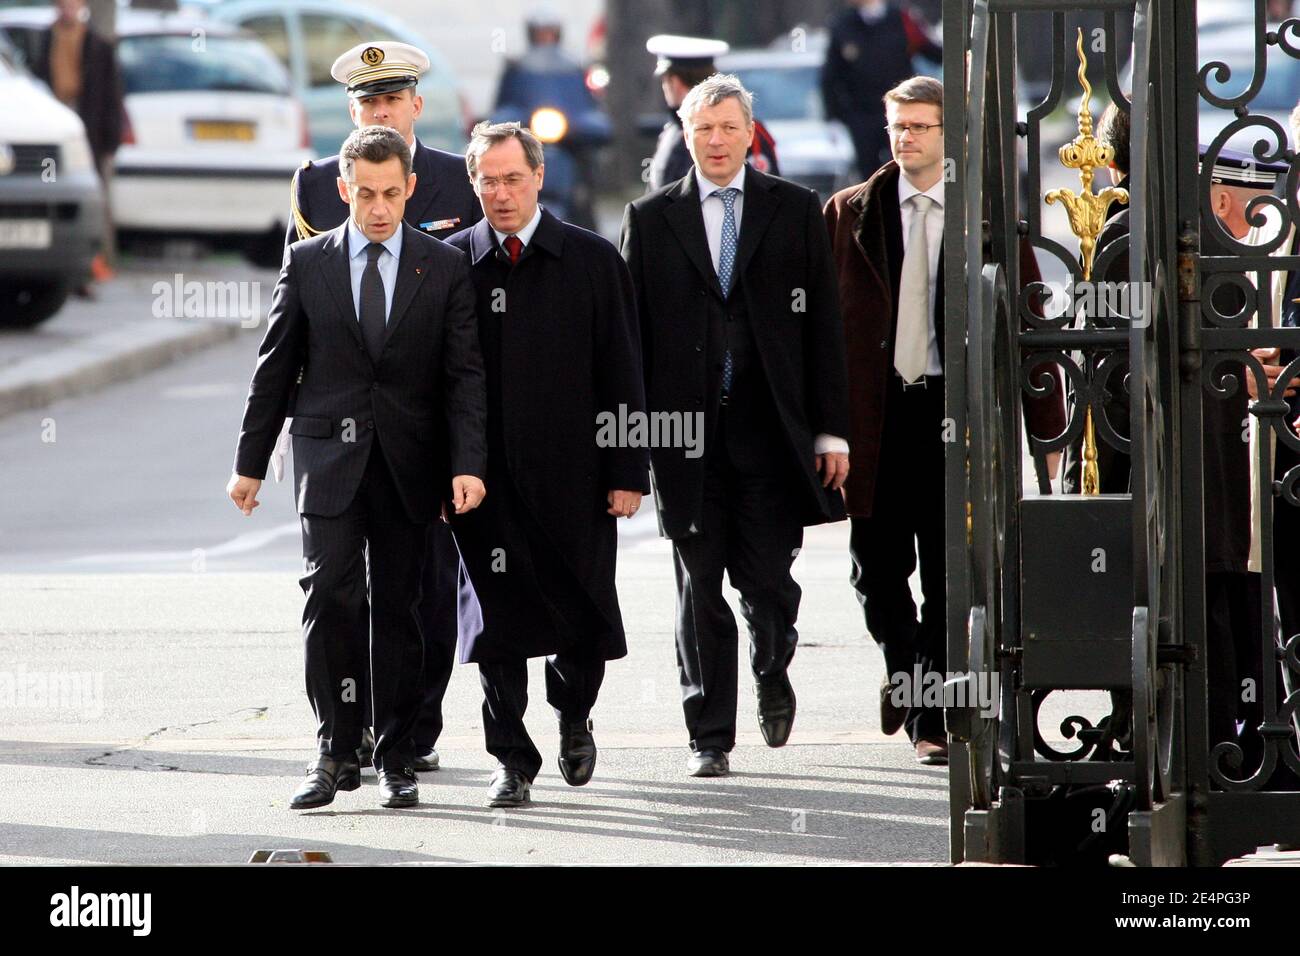 Nicolas Sarkozy, Calude Gueant arriving at a ceremony Place Beauvau, in memory of Prefect Claude Erignac, who was killed in Corsica in 1998. Paris, France, on February 6, 2008. Photo by Mousse-Taamallah/ABACAPRESS.COM Stock Photo